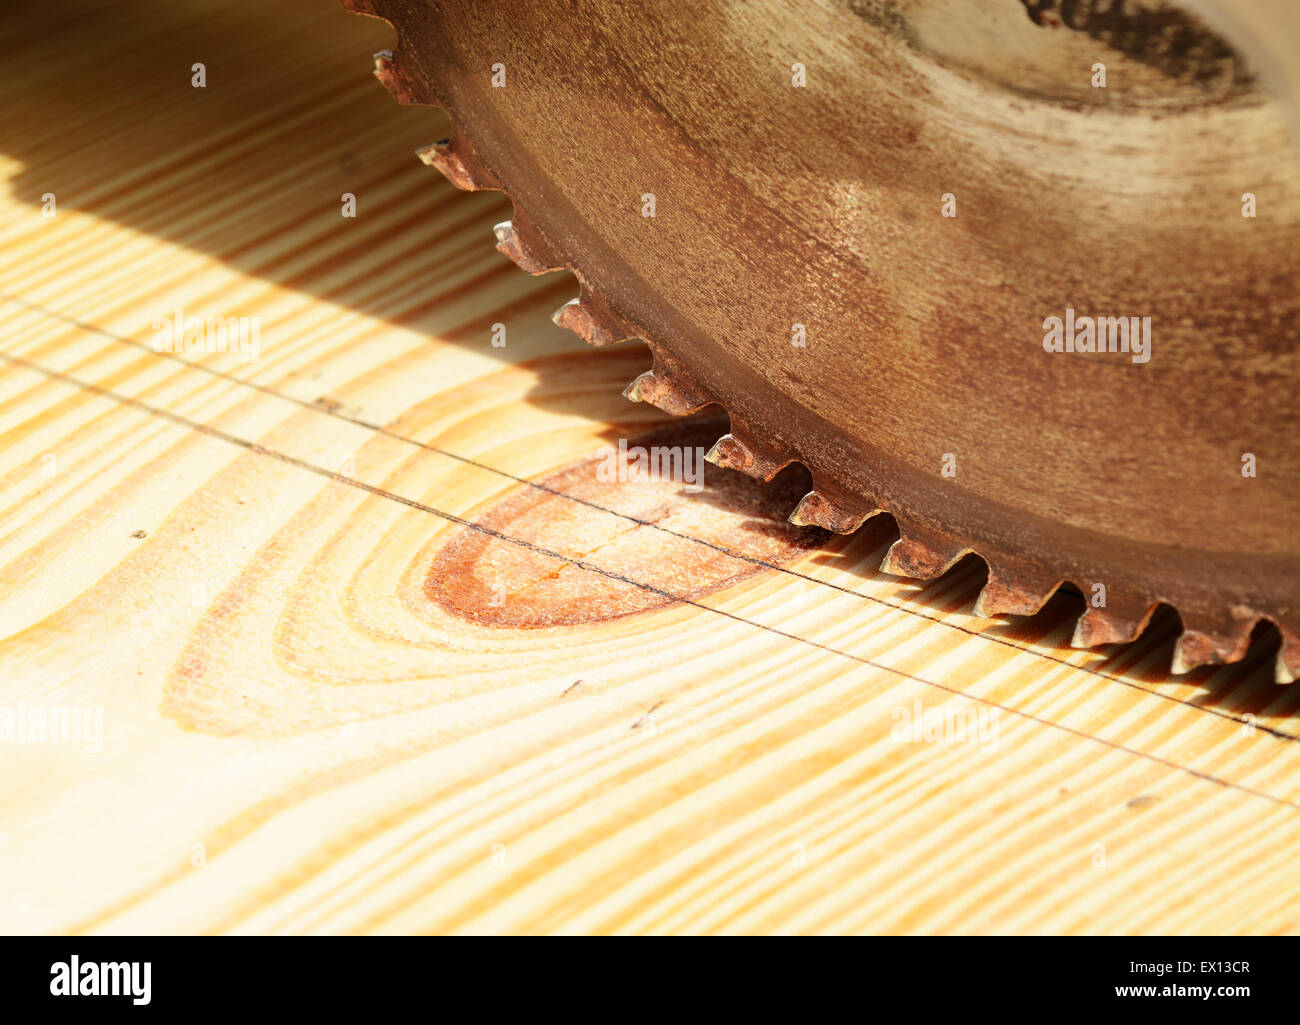 Macro shot of a table saw blade over a pine wood board Stock Photo